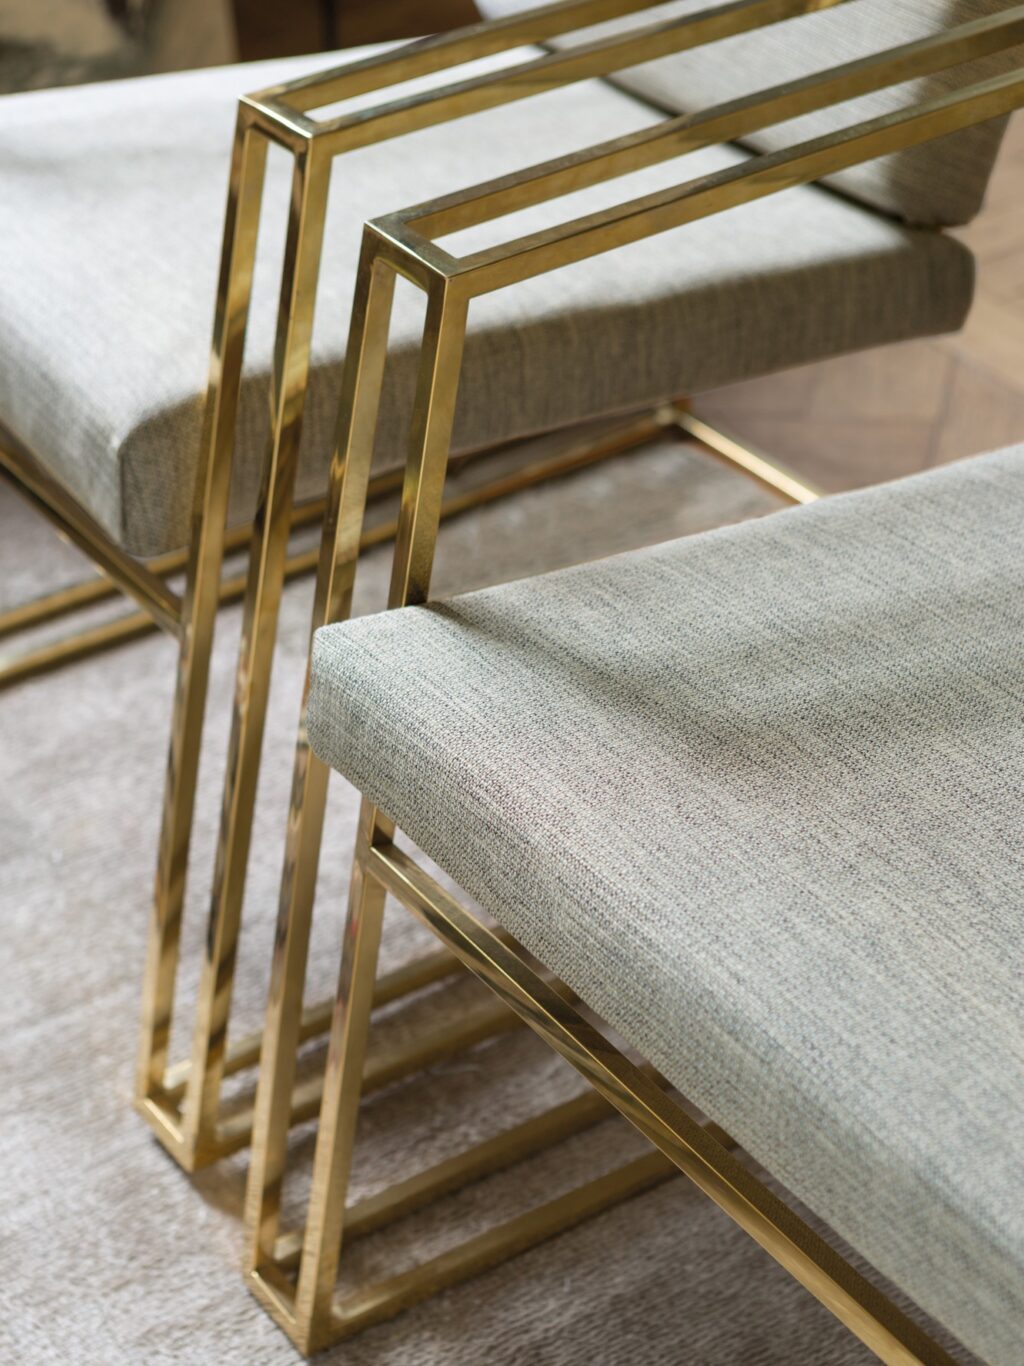 art deco metallic chairs with soft neutral fibreguard fabric seat cushions